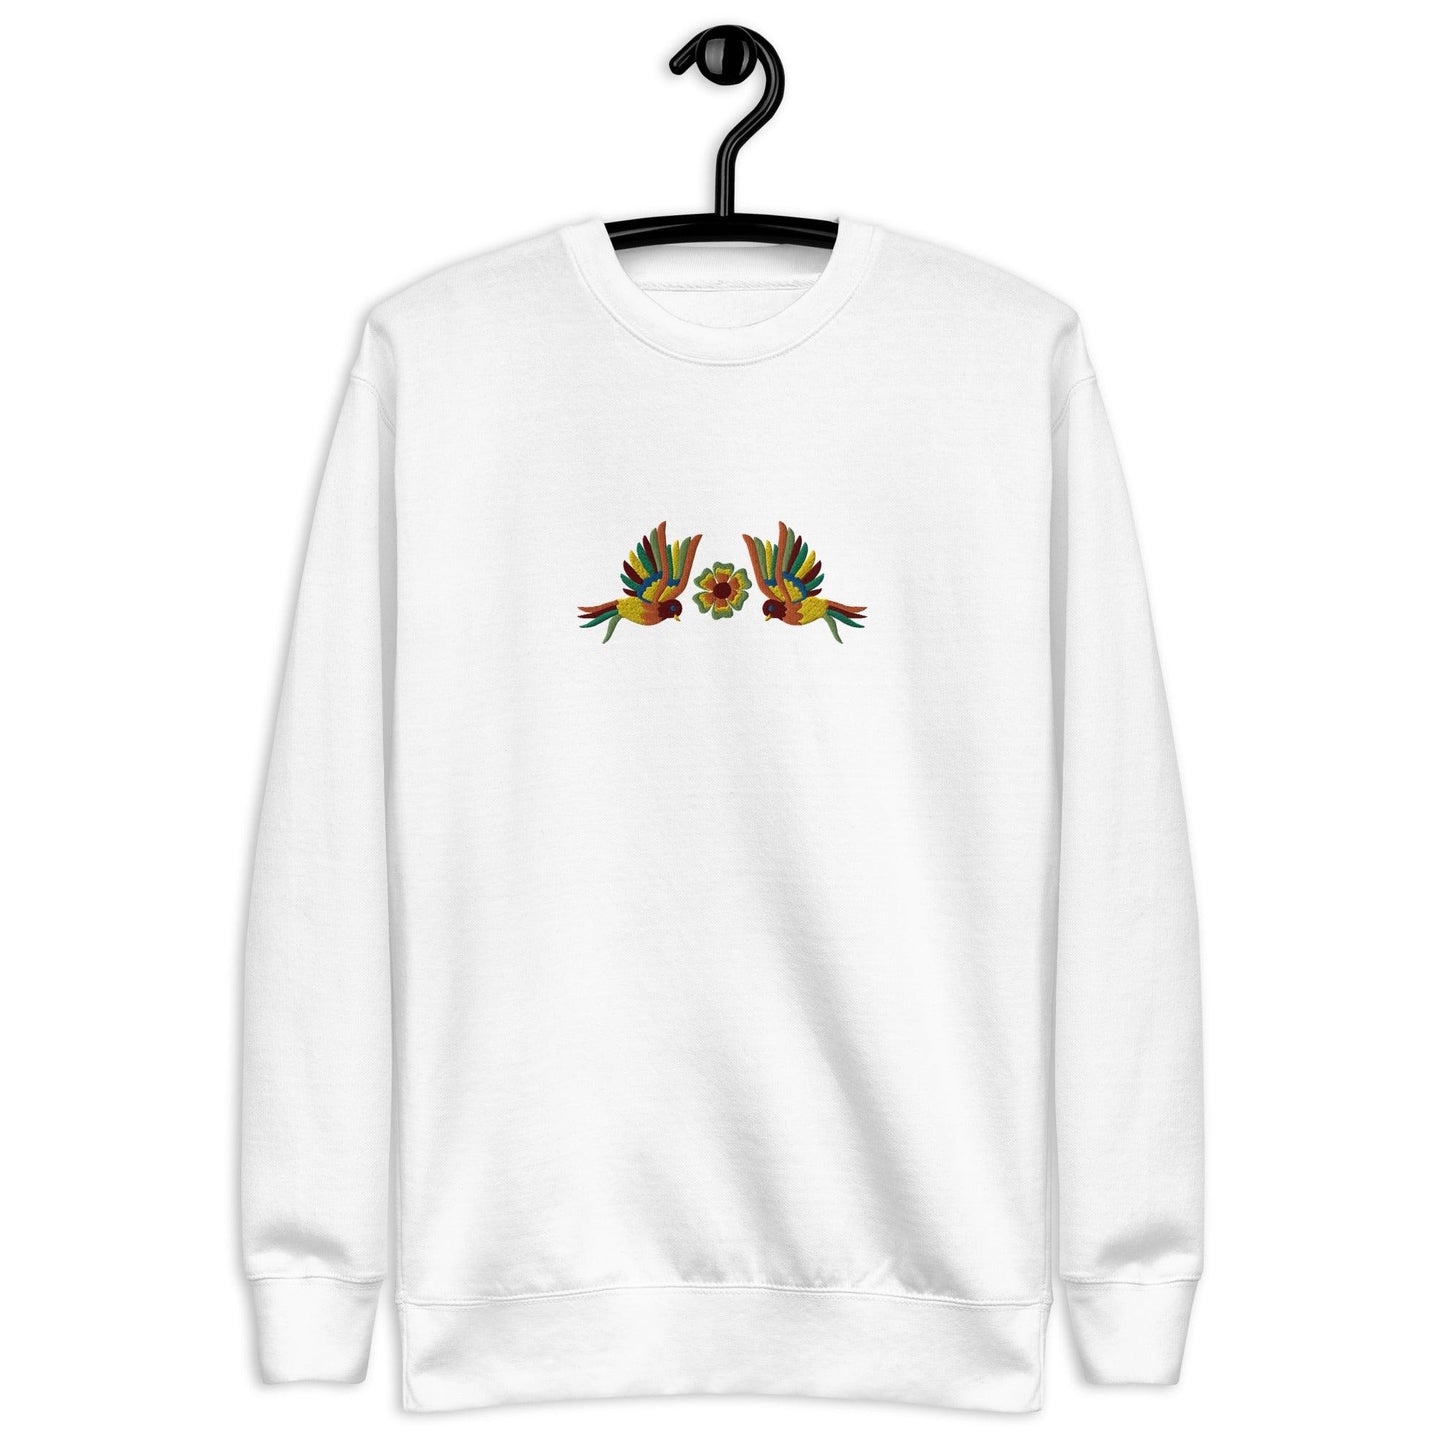 Mexican Otomi Embroidered Sweatshirt - The Global Wanderer